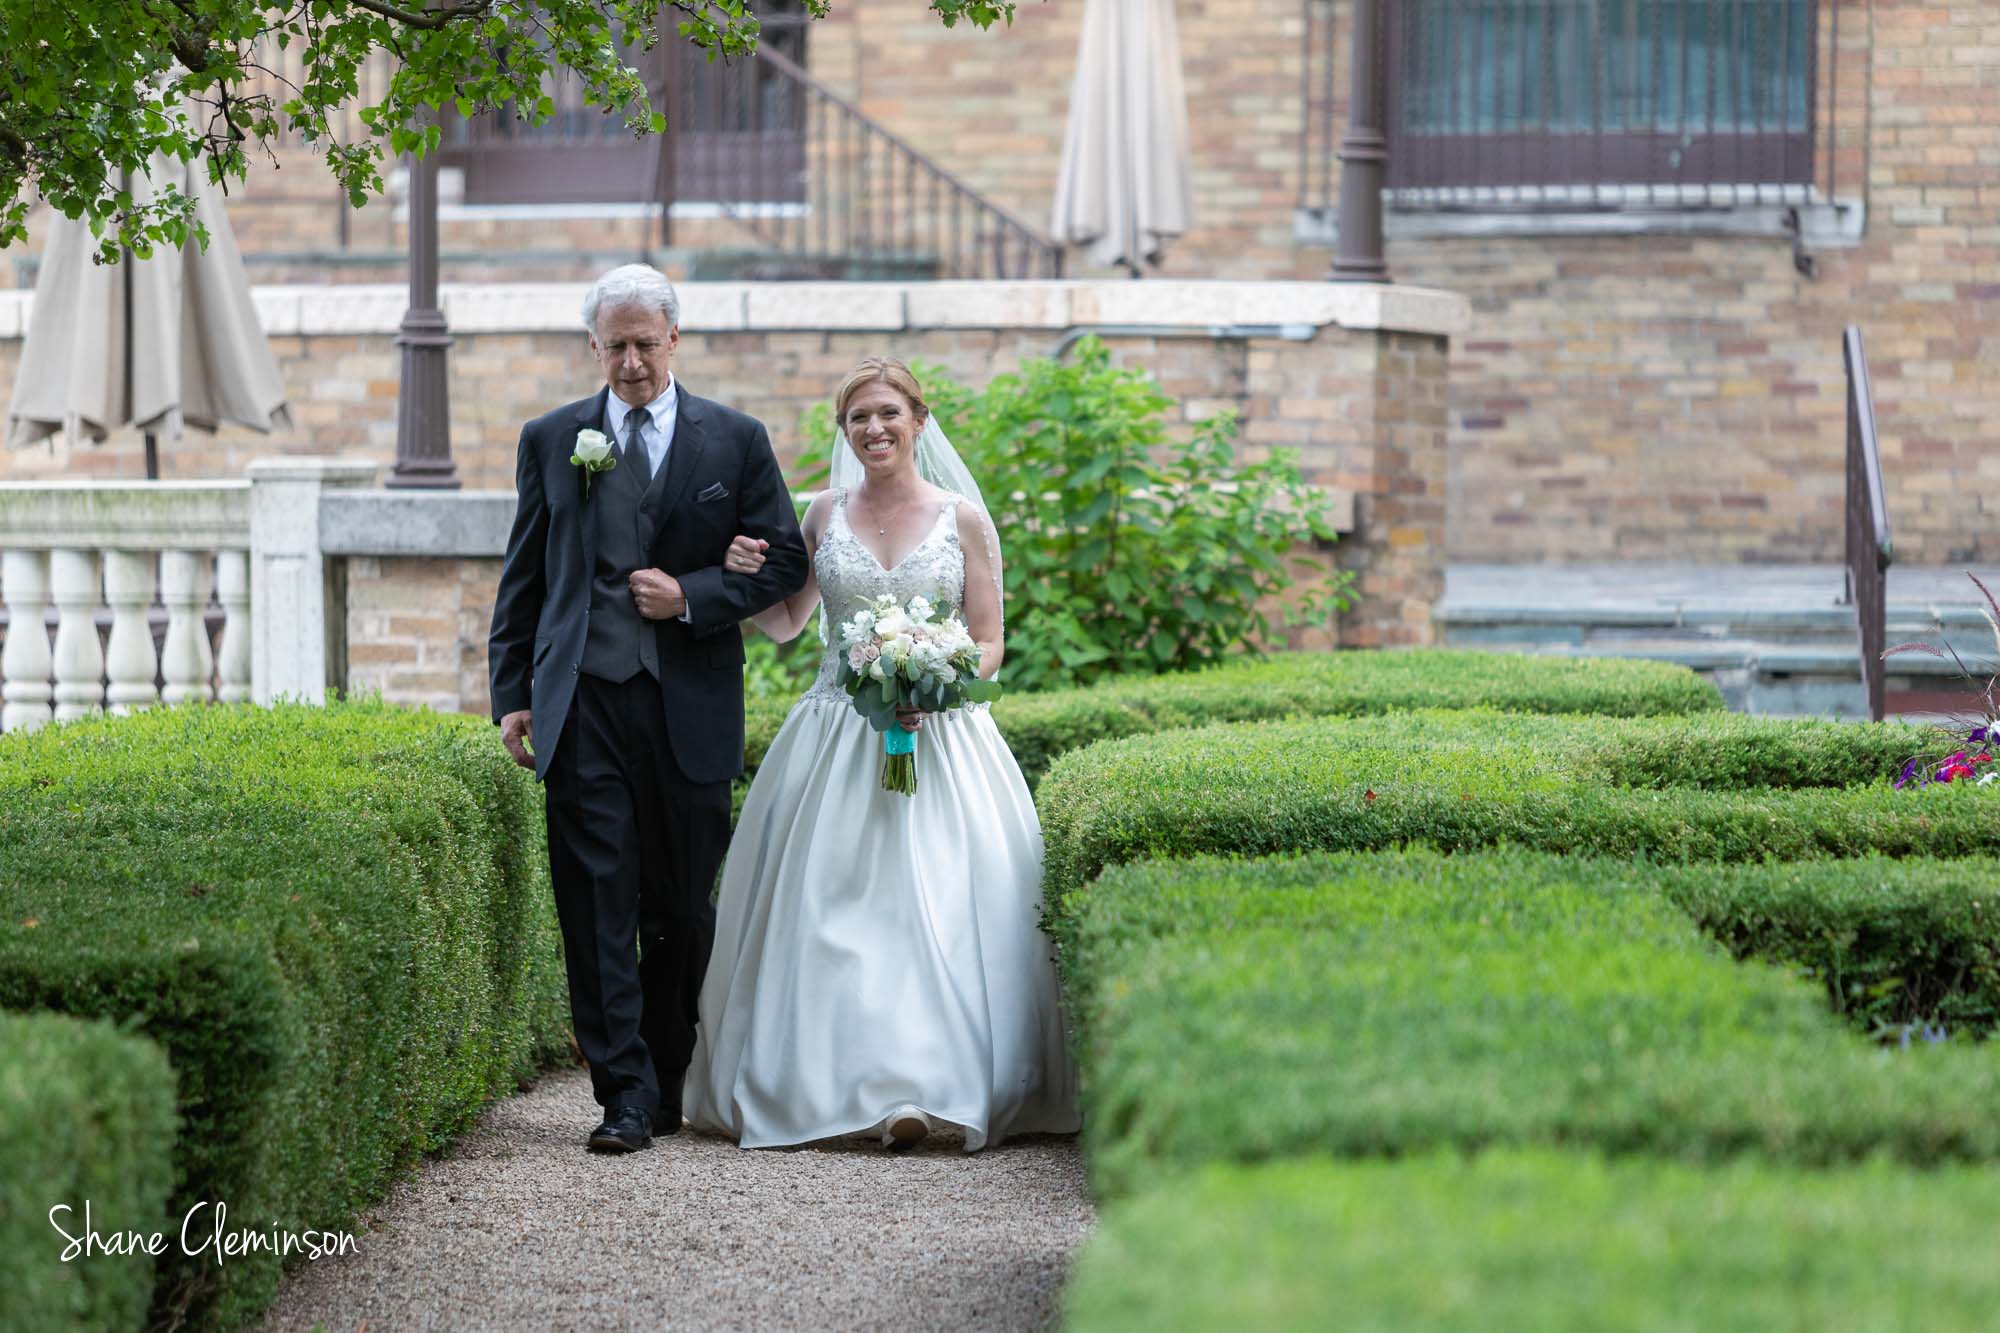 Hotel Baker Wedding St Charles IL by Shane Cleminson Photography